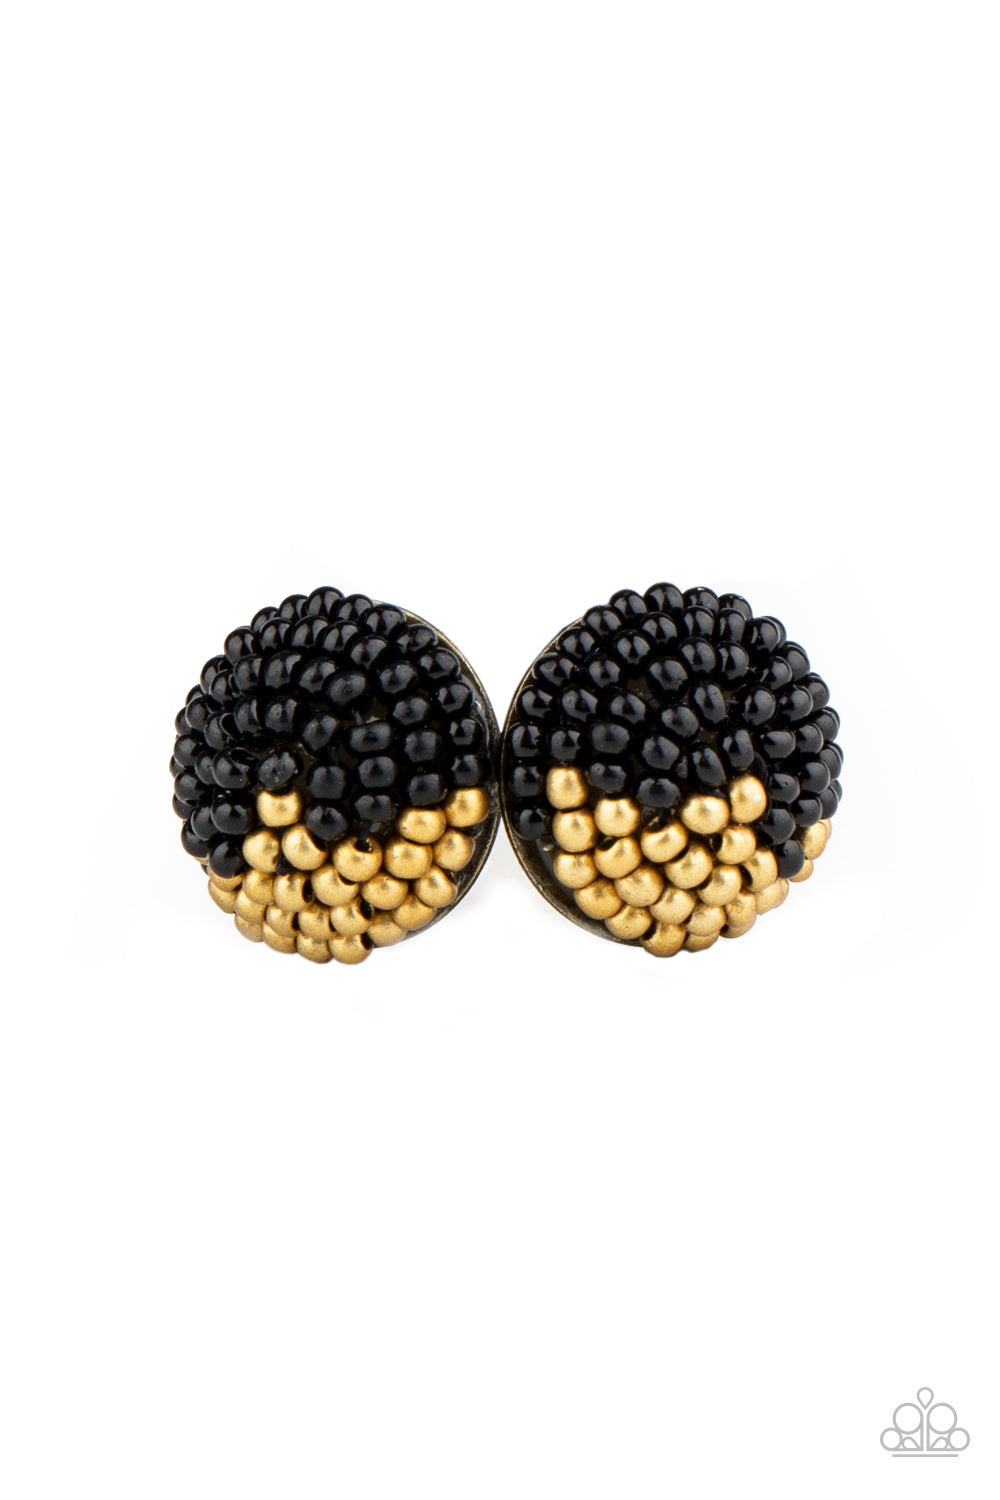 As Happy As Can BEAD - Black Item #P5PO-BKXX-150XX A dainty collection of black and brassy seed beads embellished the front of a circular frame, creating a colorful half and half pattern. Earring attaches to a standard post fitting.  Sold as one pair of post earrings.